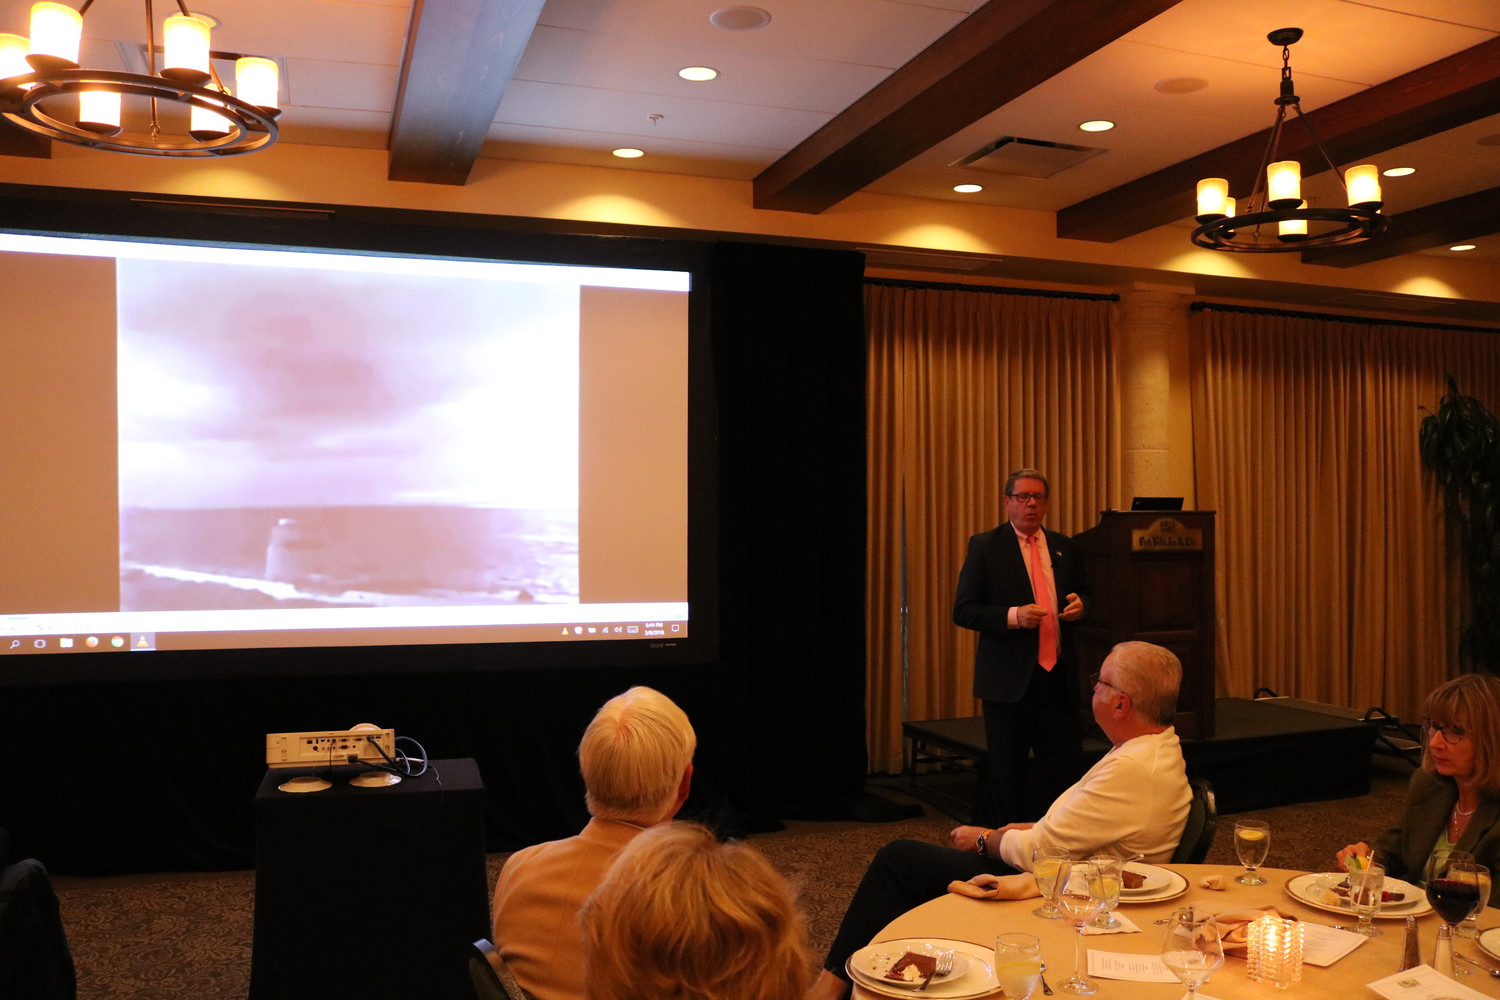 Scott Grant delivers his historical presentation at the Ponte Vedra Inn & Club.